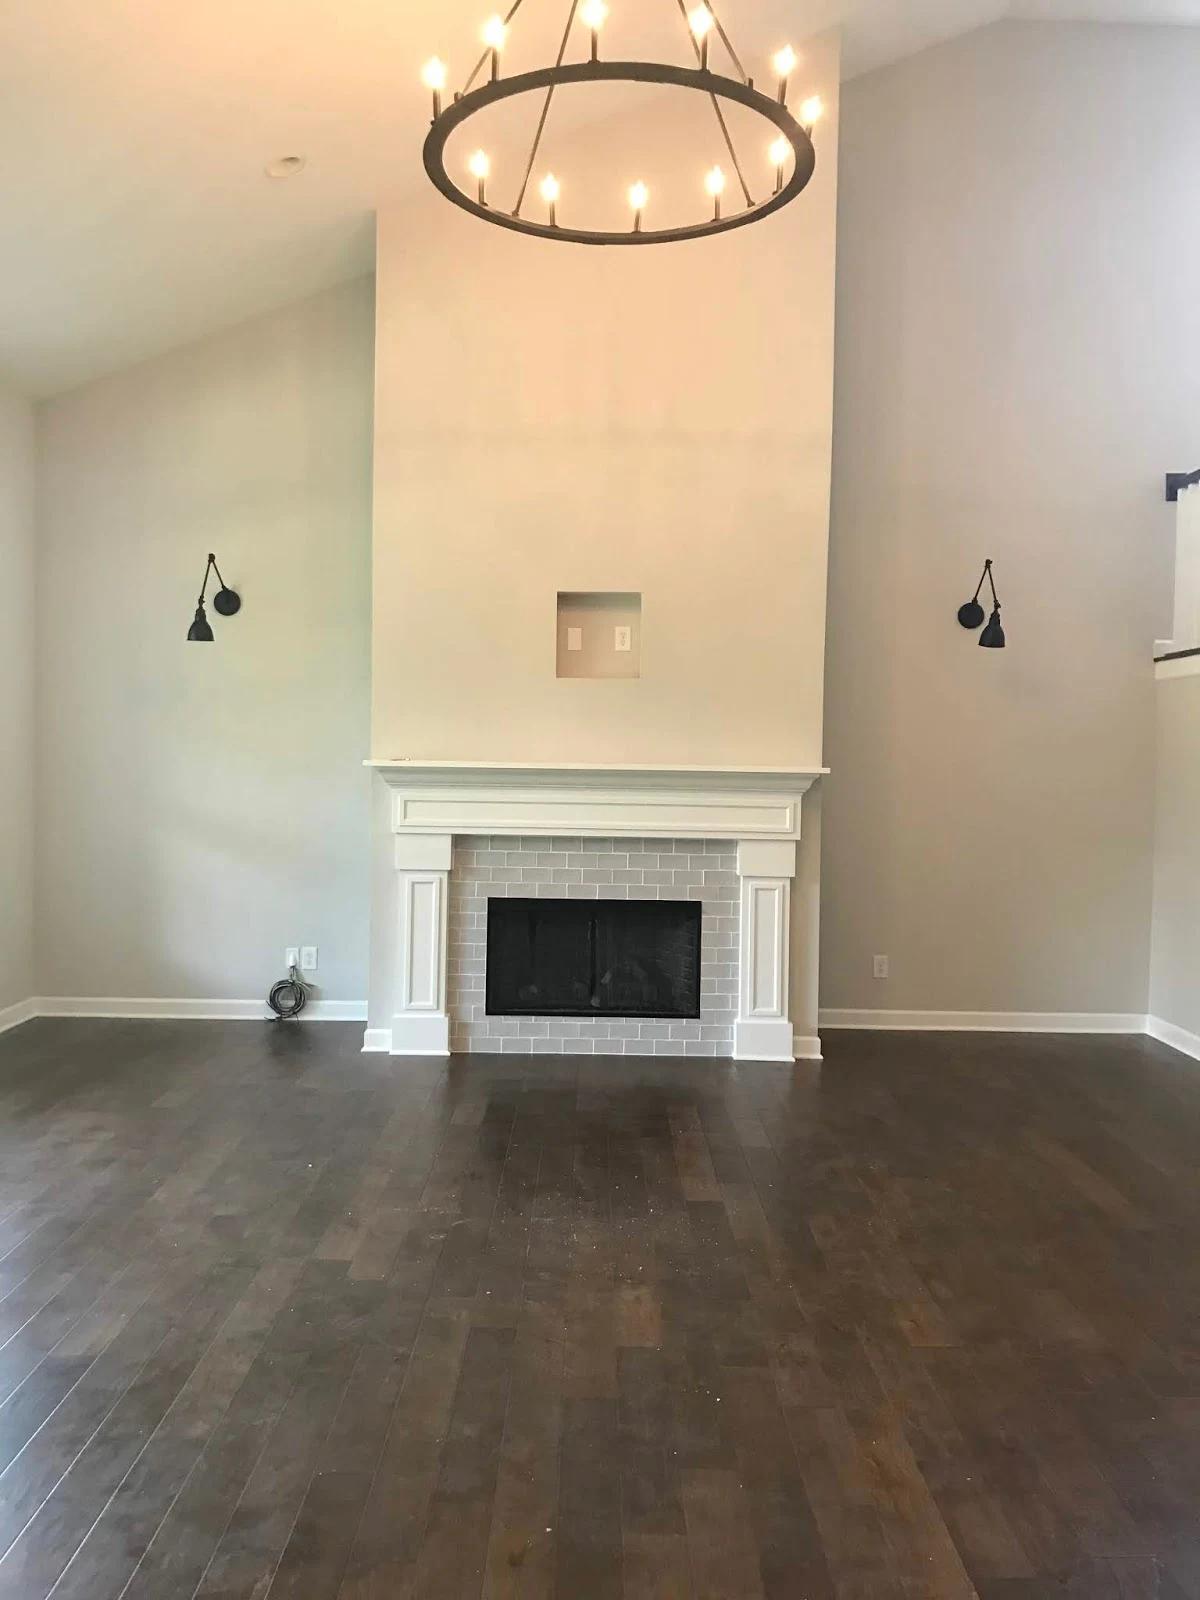 Tall fireplace with gray tile